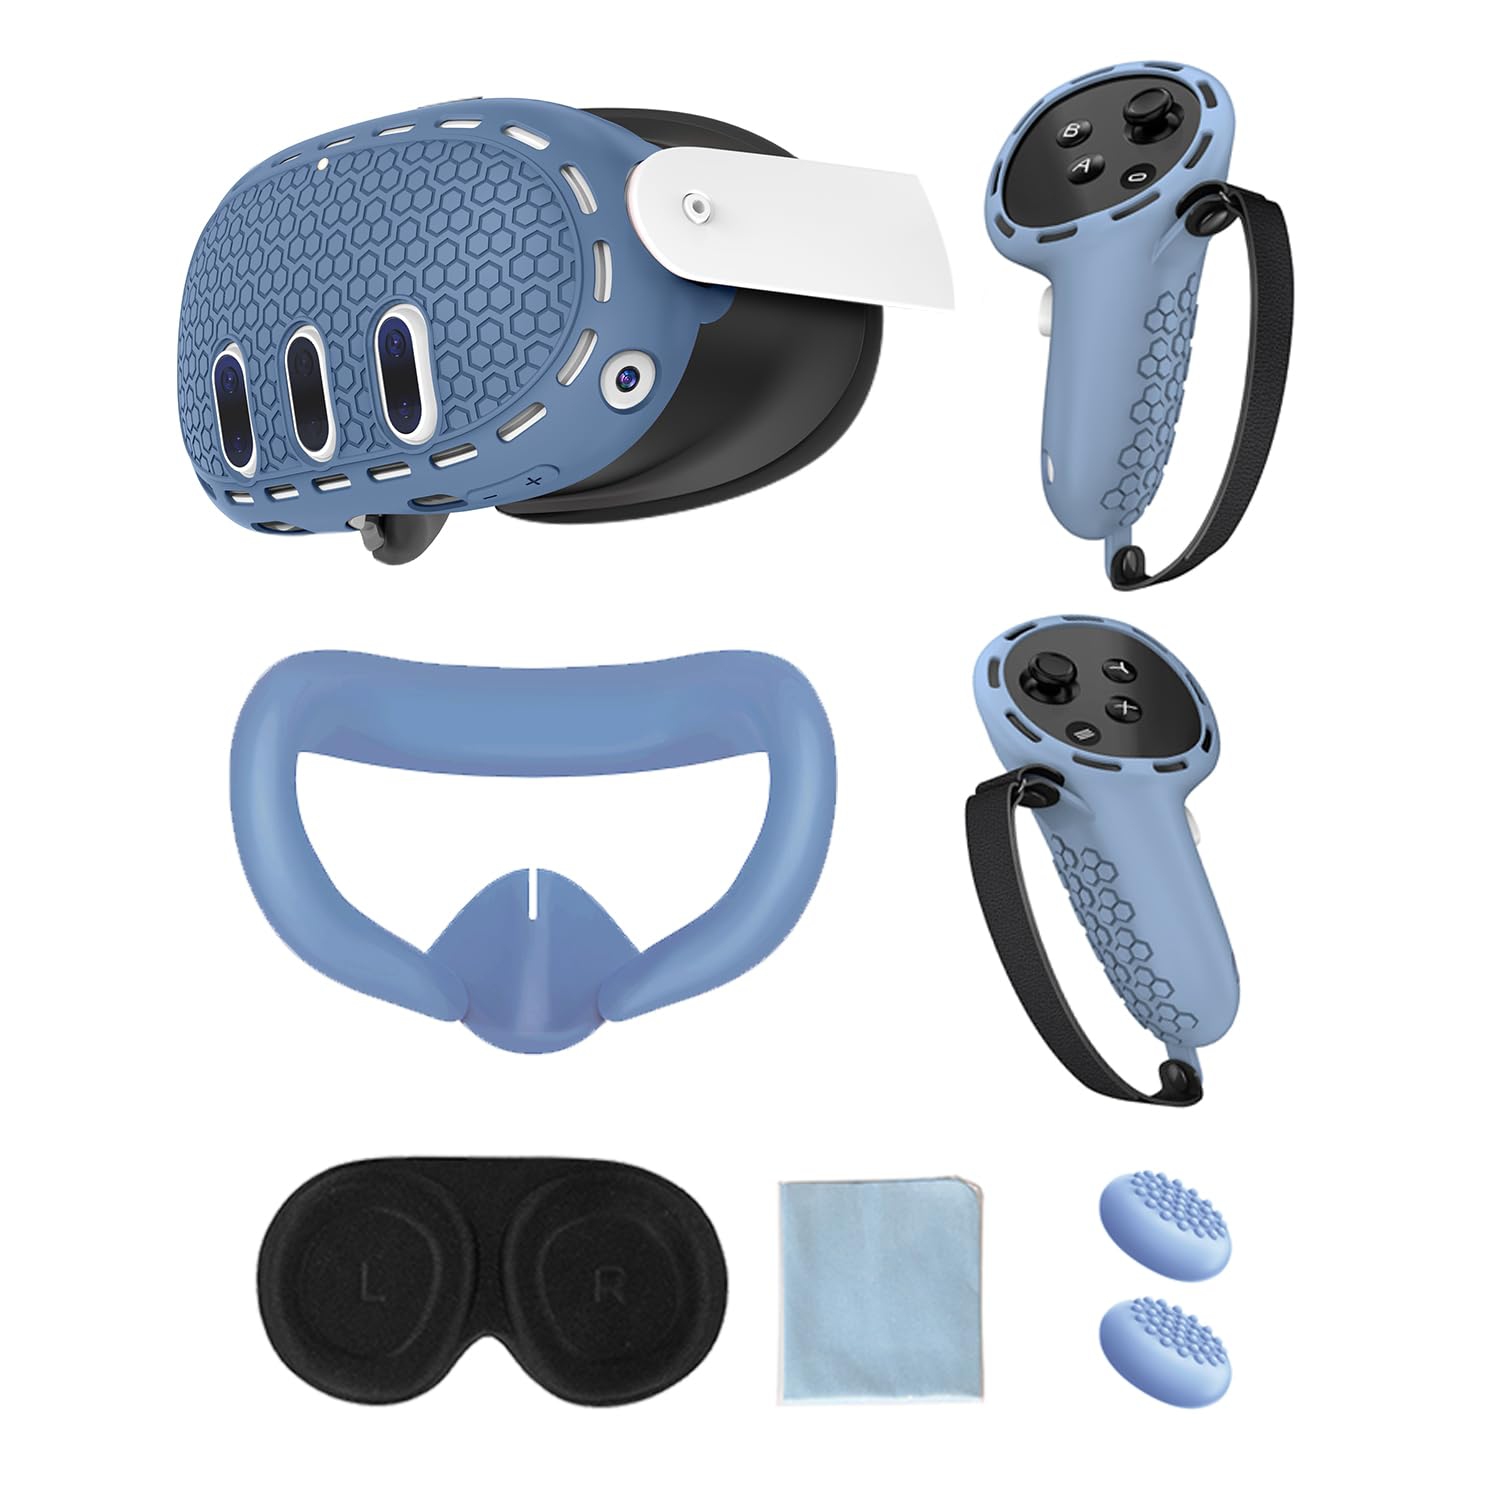 Protective Cover for Oculus/Meta Quest 3 Accessories, Silicone Controllers Grip Cover Protector, Soft Shell Skin with Face Cover and Lens Cover by Gwyoneaon (Blue)